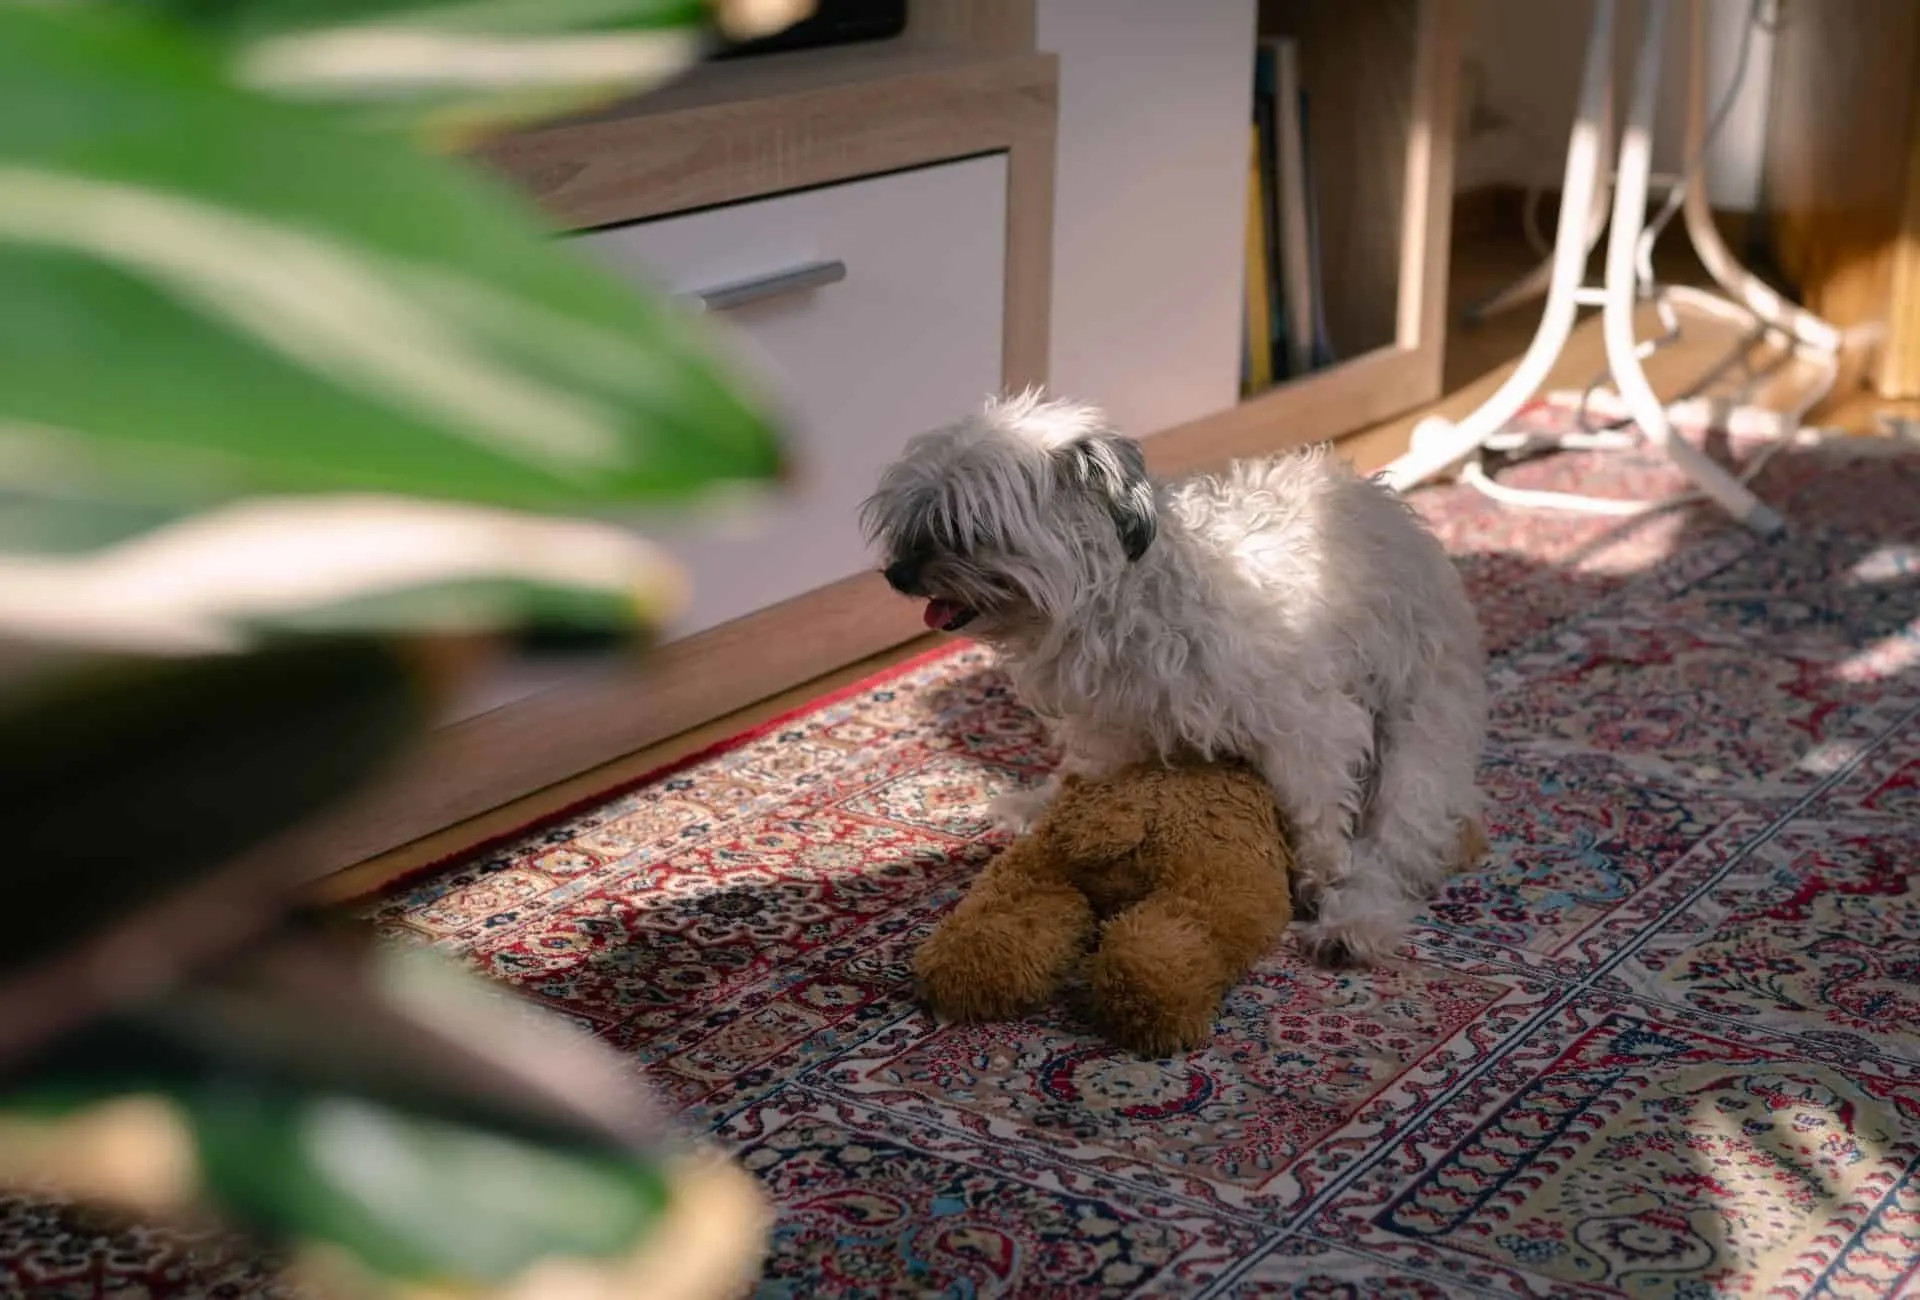 A small female dog is humping a stuffed animal toy inside the house.